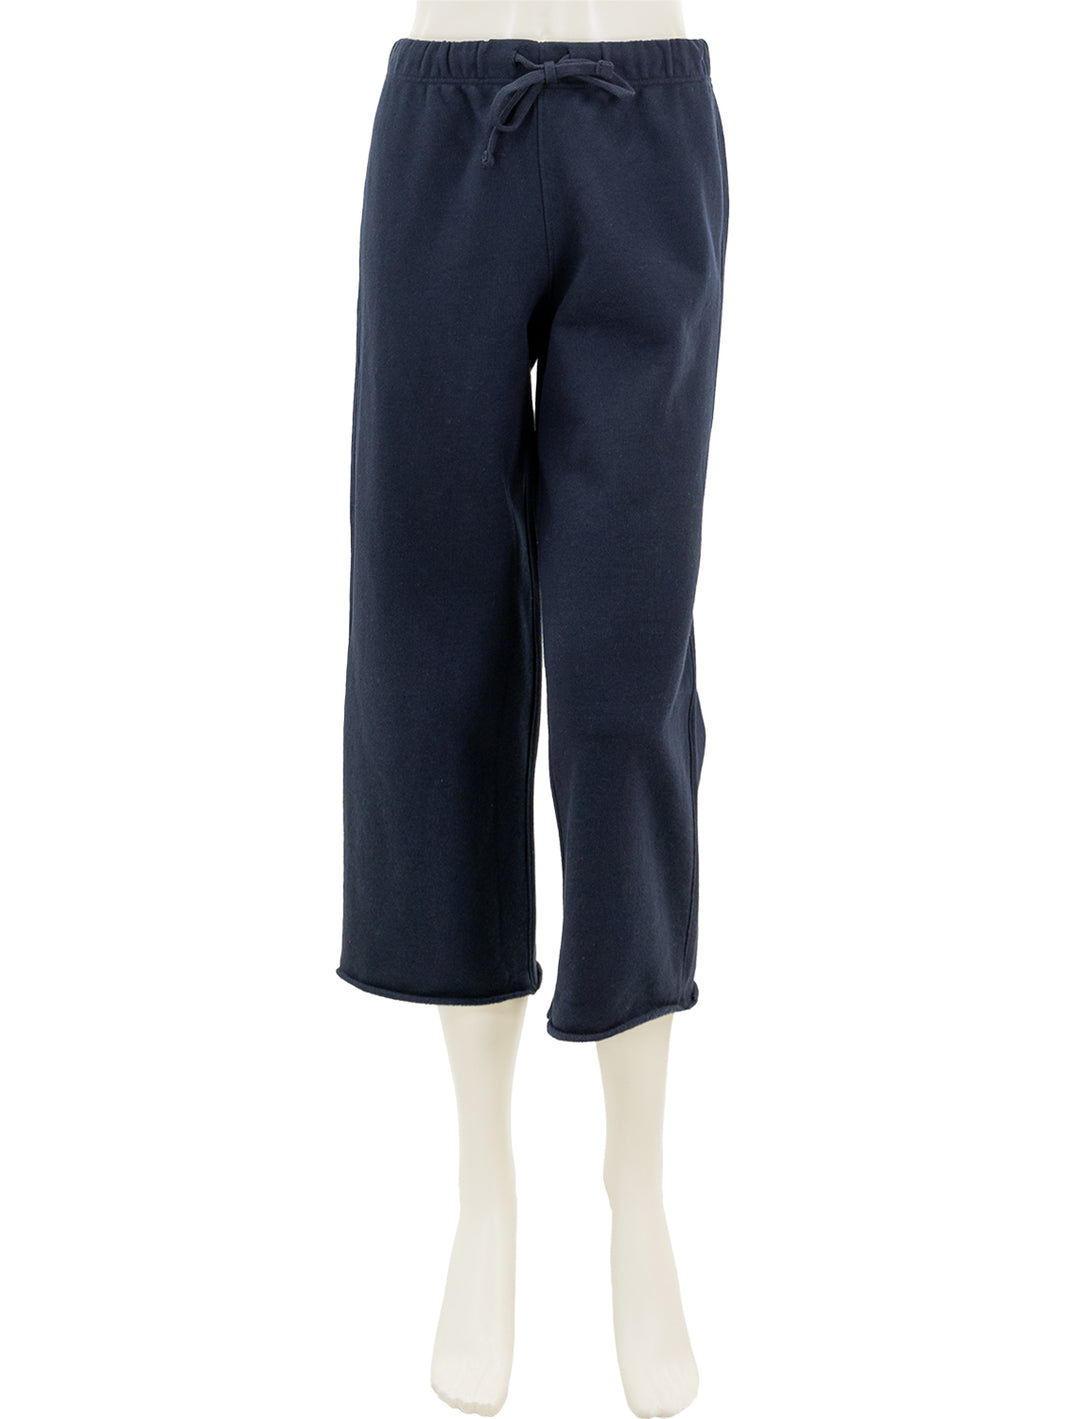 Front view of Splendid's cassie terry pant in navy.